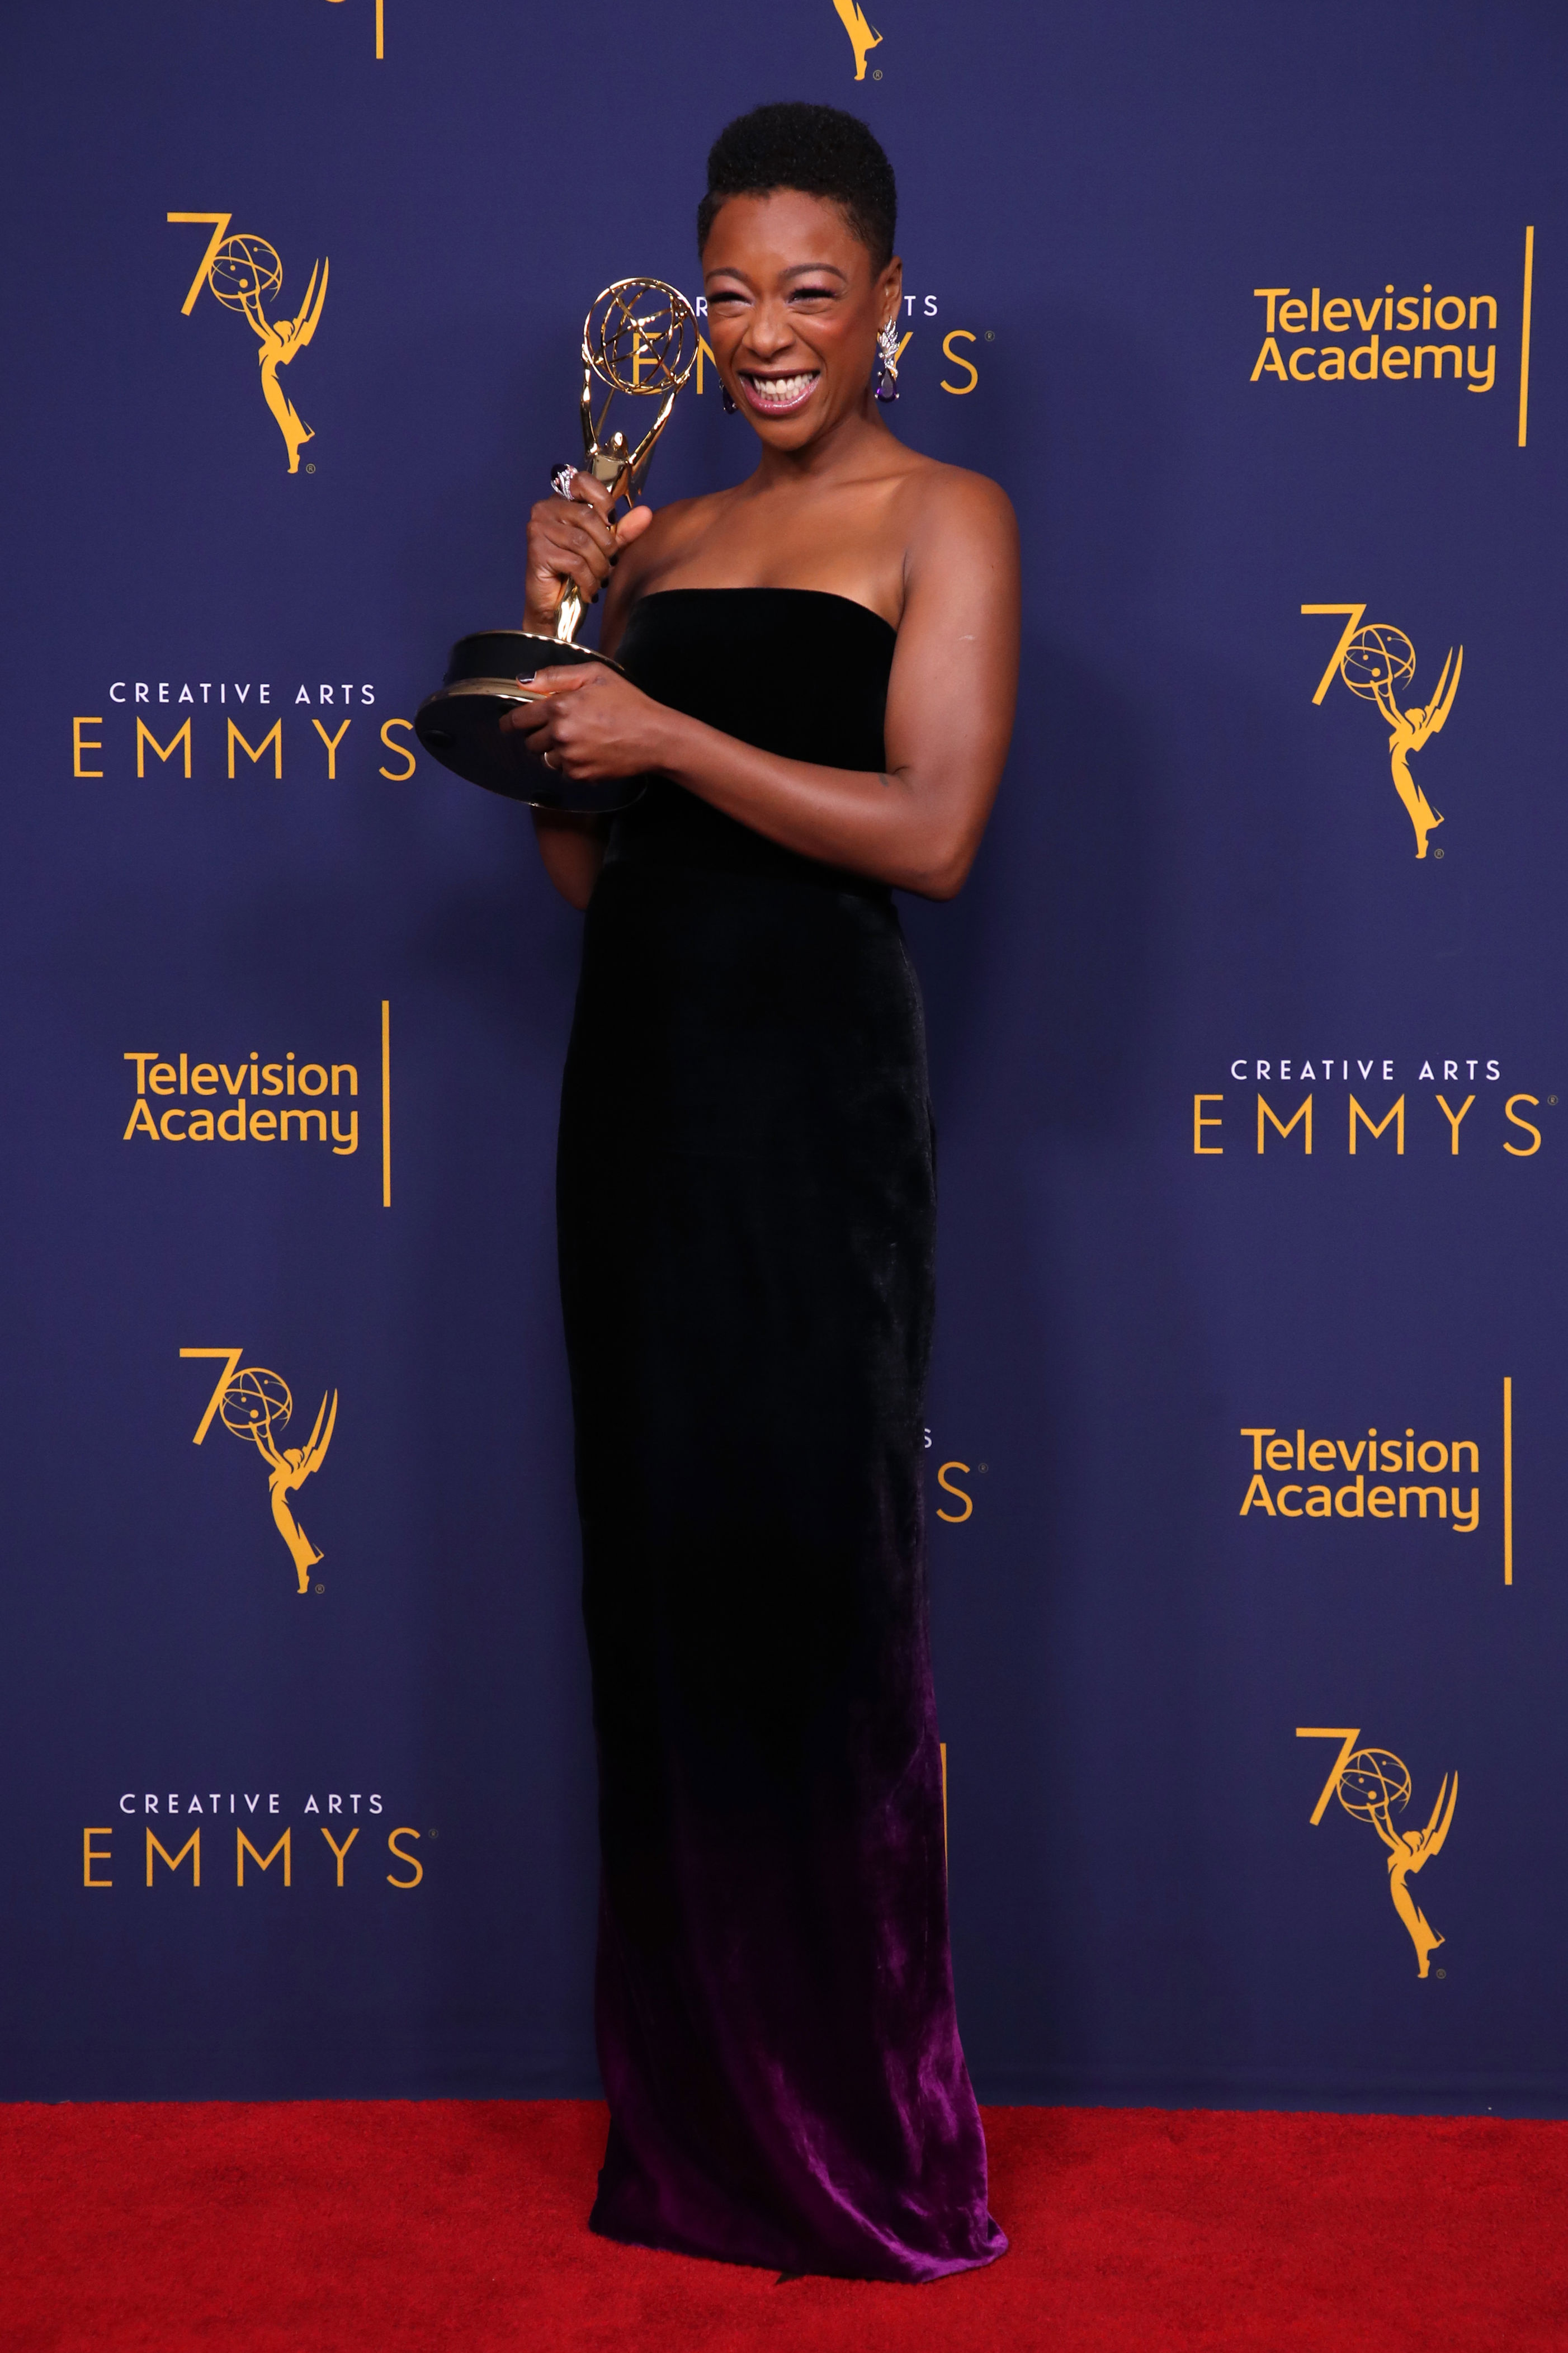 <p>History was made at the <a href="https://www.wonderwall.com/awards-events/emmys/2018-creative-arts-emmy-awards-3016324.gallery">Creative Arts Emmys in 2018</a> when Black performers swept all four guest-acting categories. Samira Wiley won best guest actress in a drama for "The Handmaid's Tale," Tiffany Haddish won best guest actress in a comedy for hosting "Saturday Night Live," Ron Cephas Jones won best guest actor in a drama for "This Is Us," and Katt Williams won best guest actor in a comedy for "Atlanta." Excellence!</p>